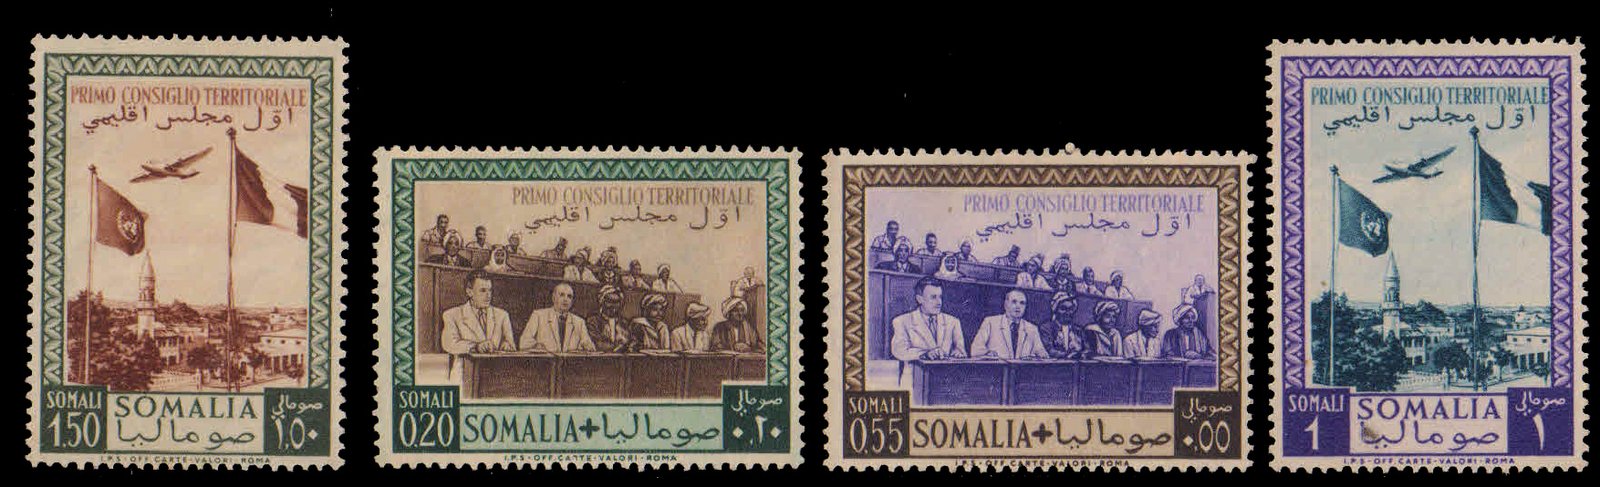 SOMALIA 1951-1st Territorial Council, Flags, Aircraft oversuspicious, Set of 4, MNH, S.G. 255-258, Cat � 40-